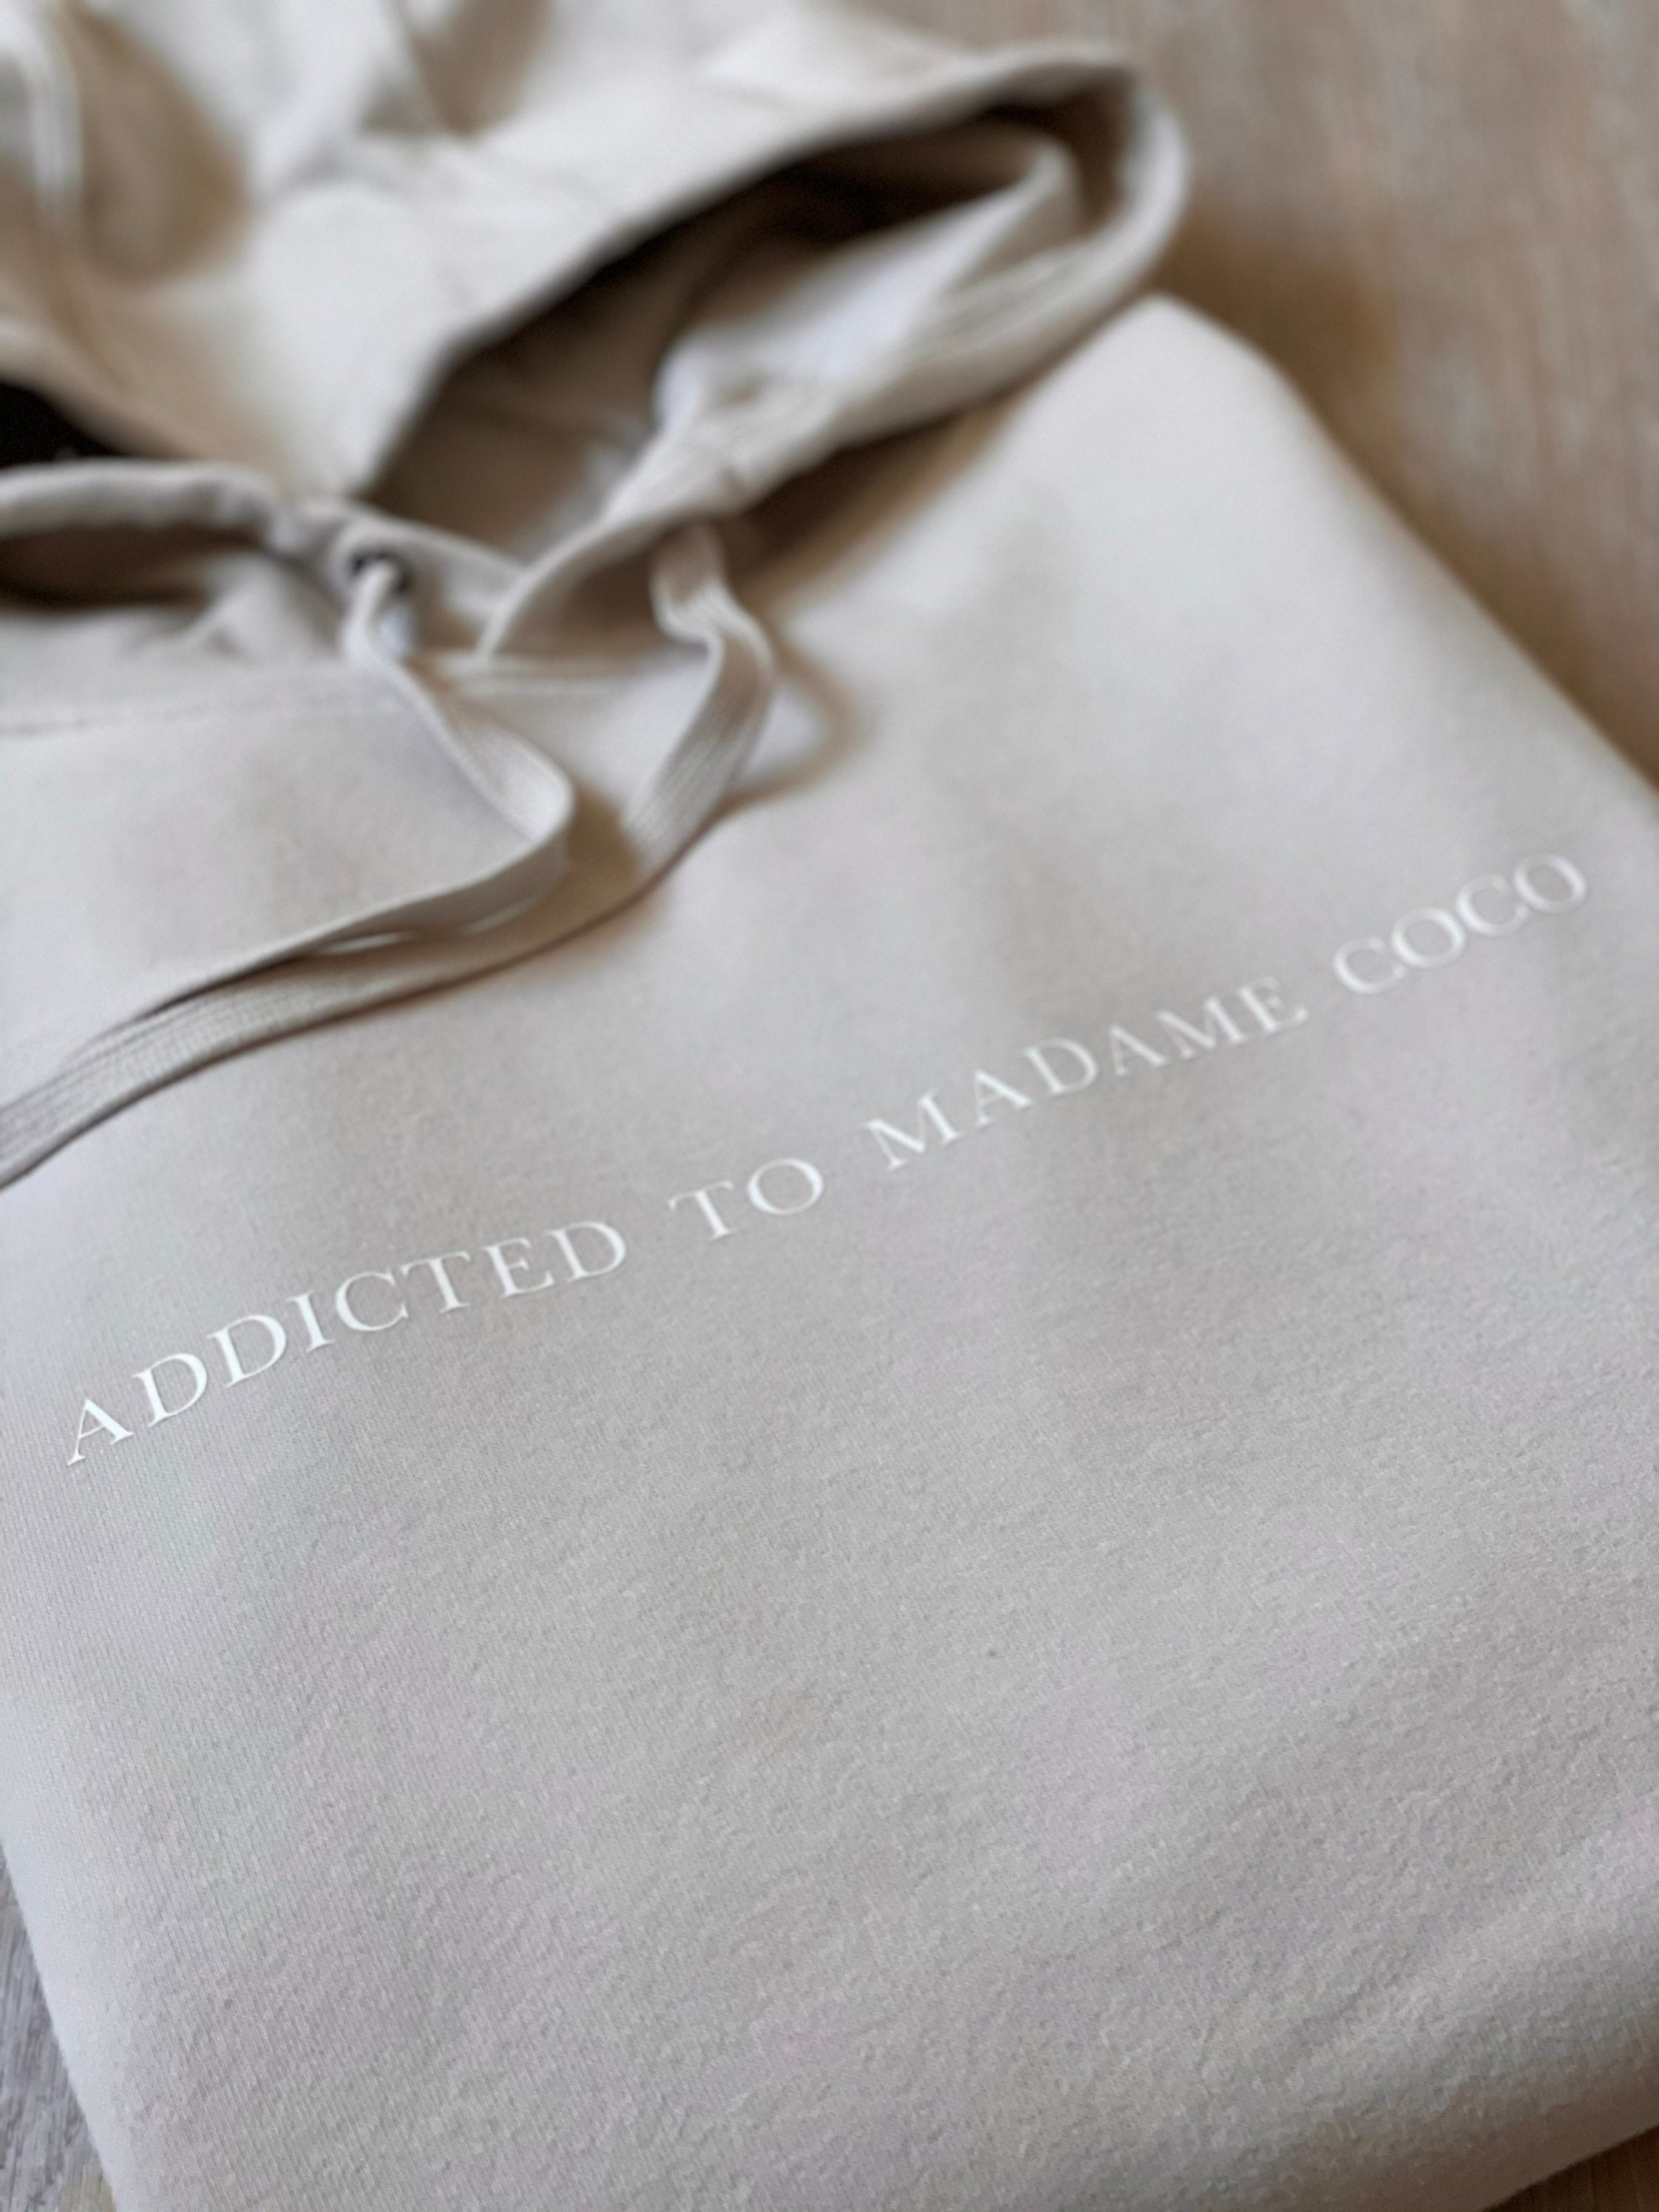 Addicted to Madame Coco Premium Hoodie Coco Hoodie Coco 